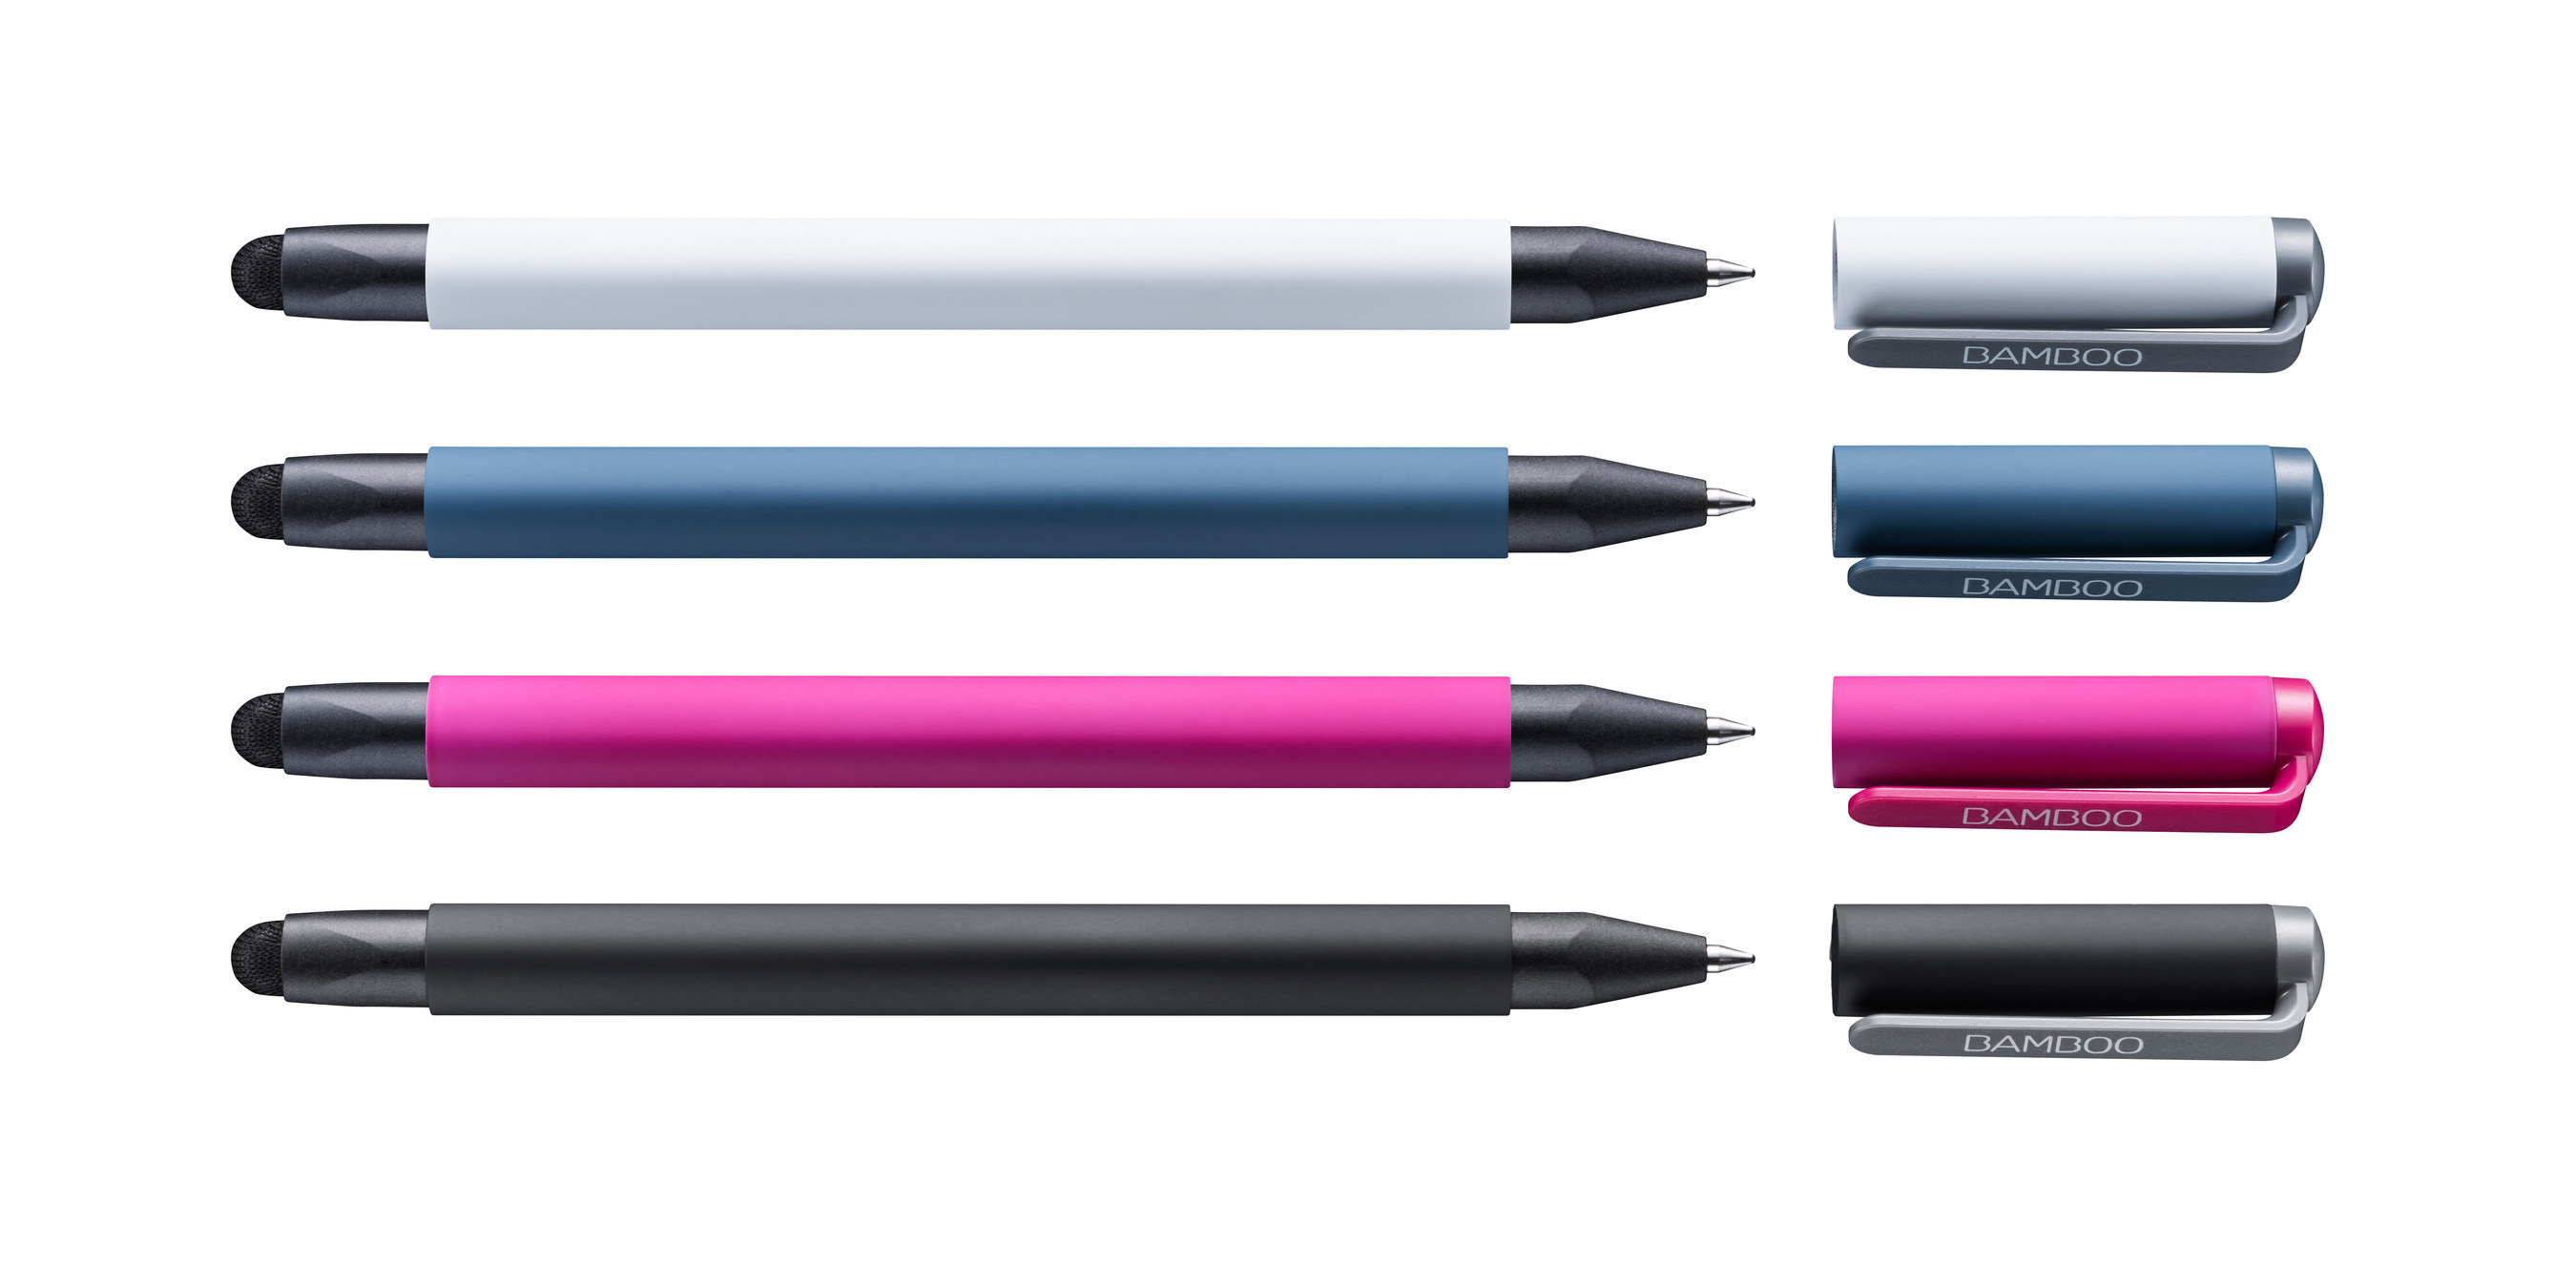 Bamboo Duo is a premium capacitive stylus.